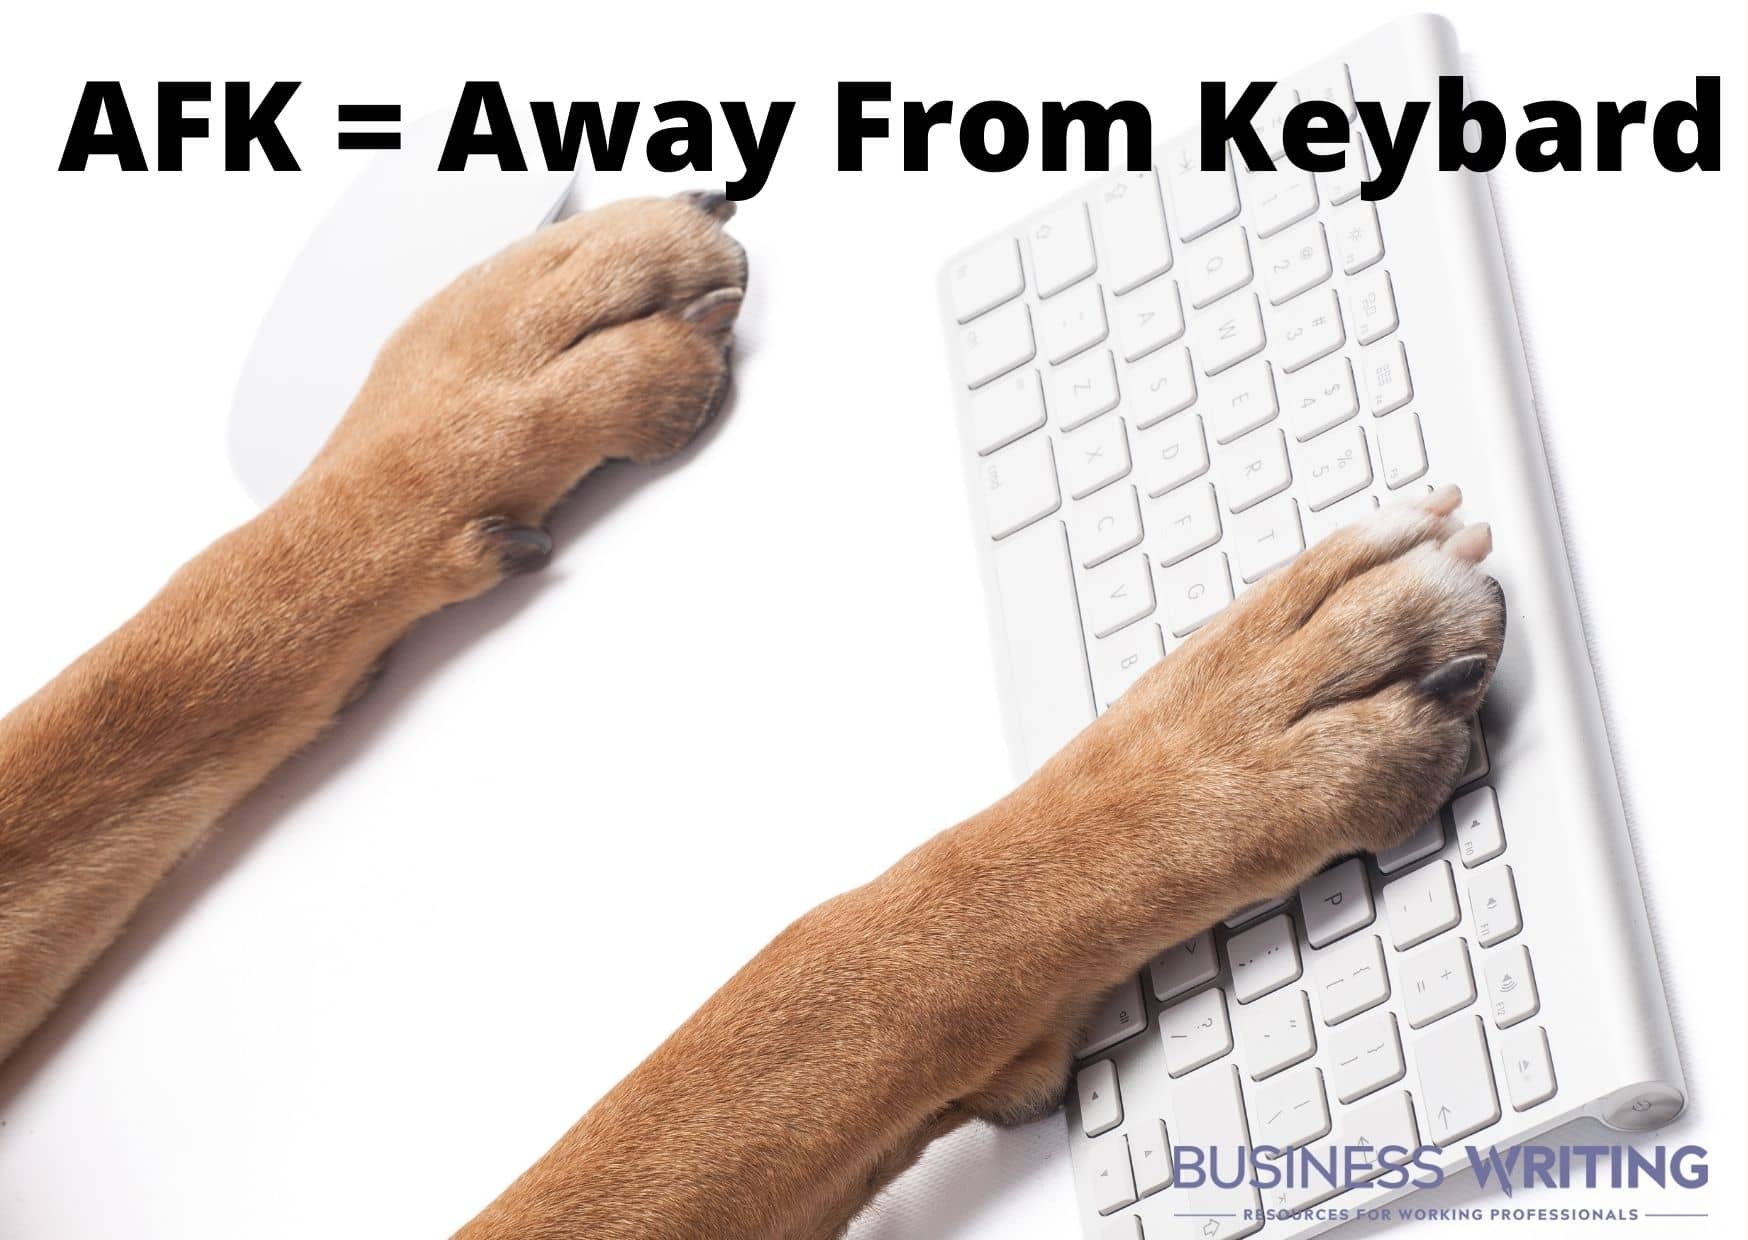 Graphic of dog's paws on a keyboard with the title "AFK = Away From Keyboard"